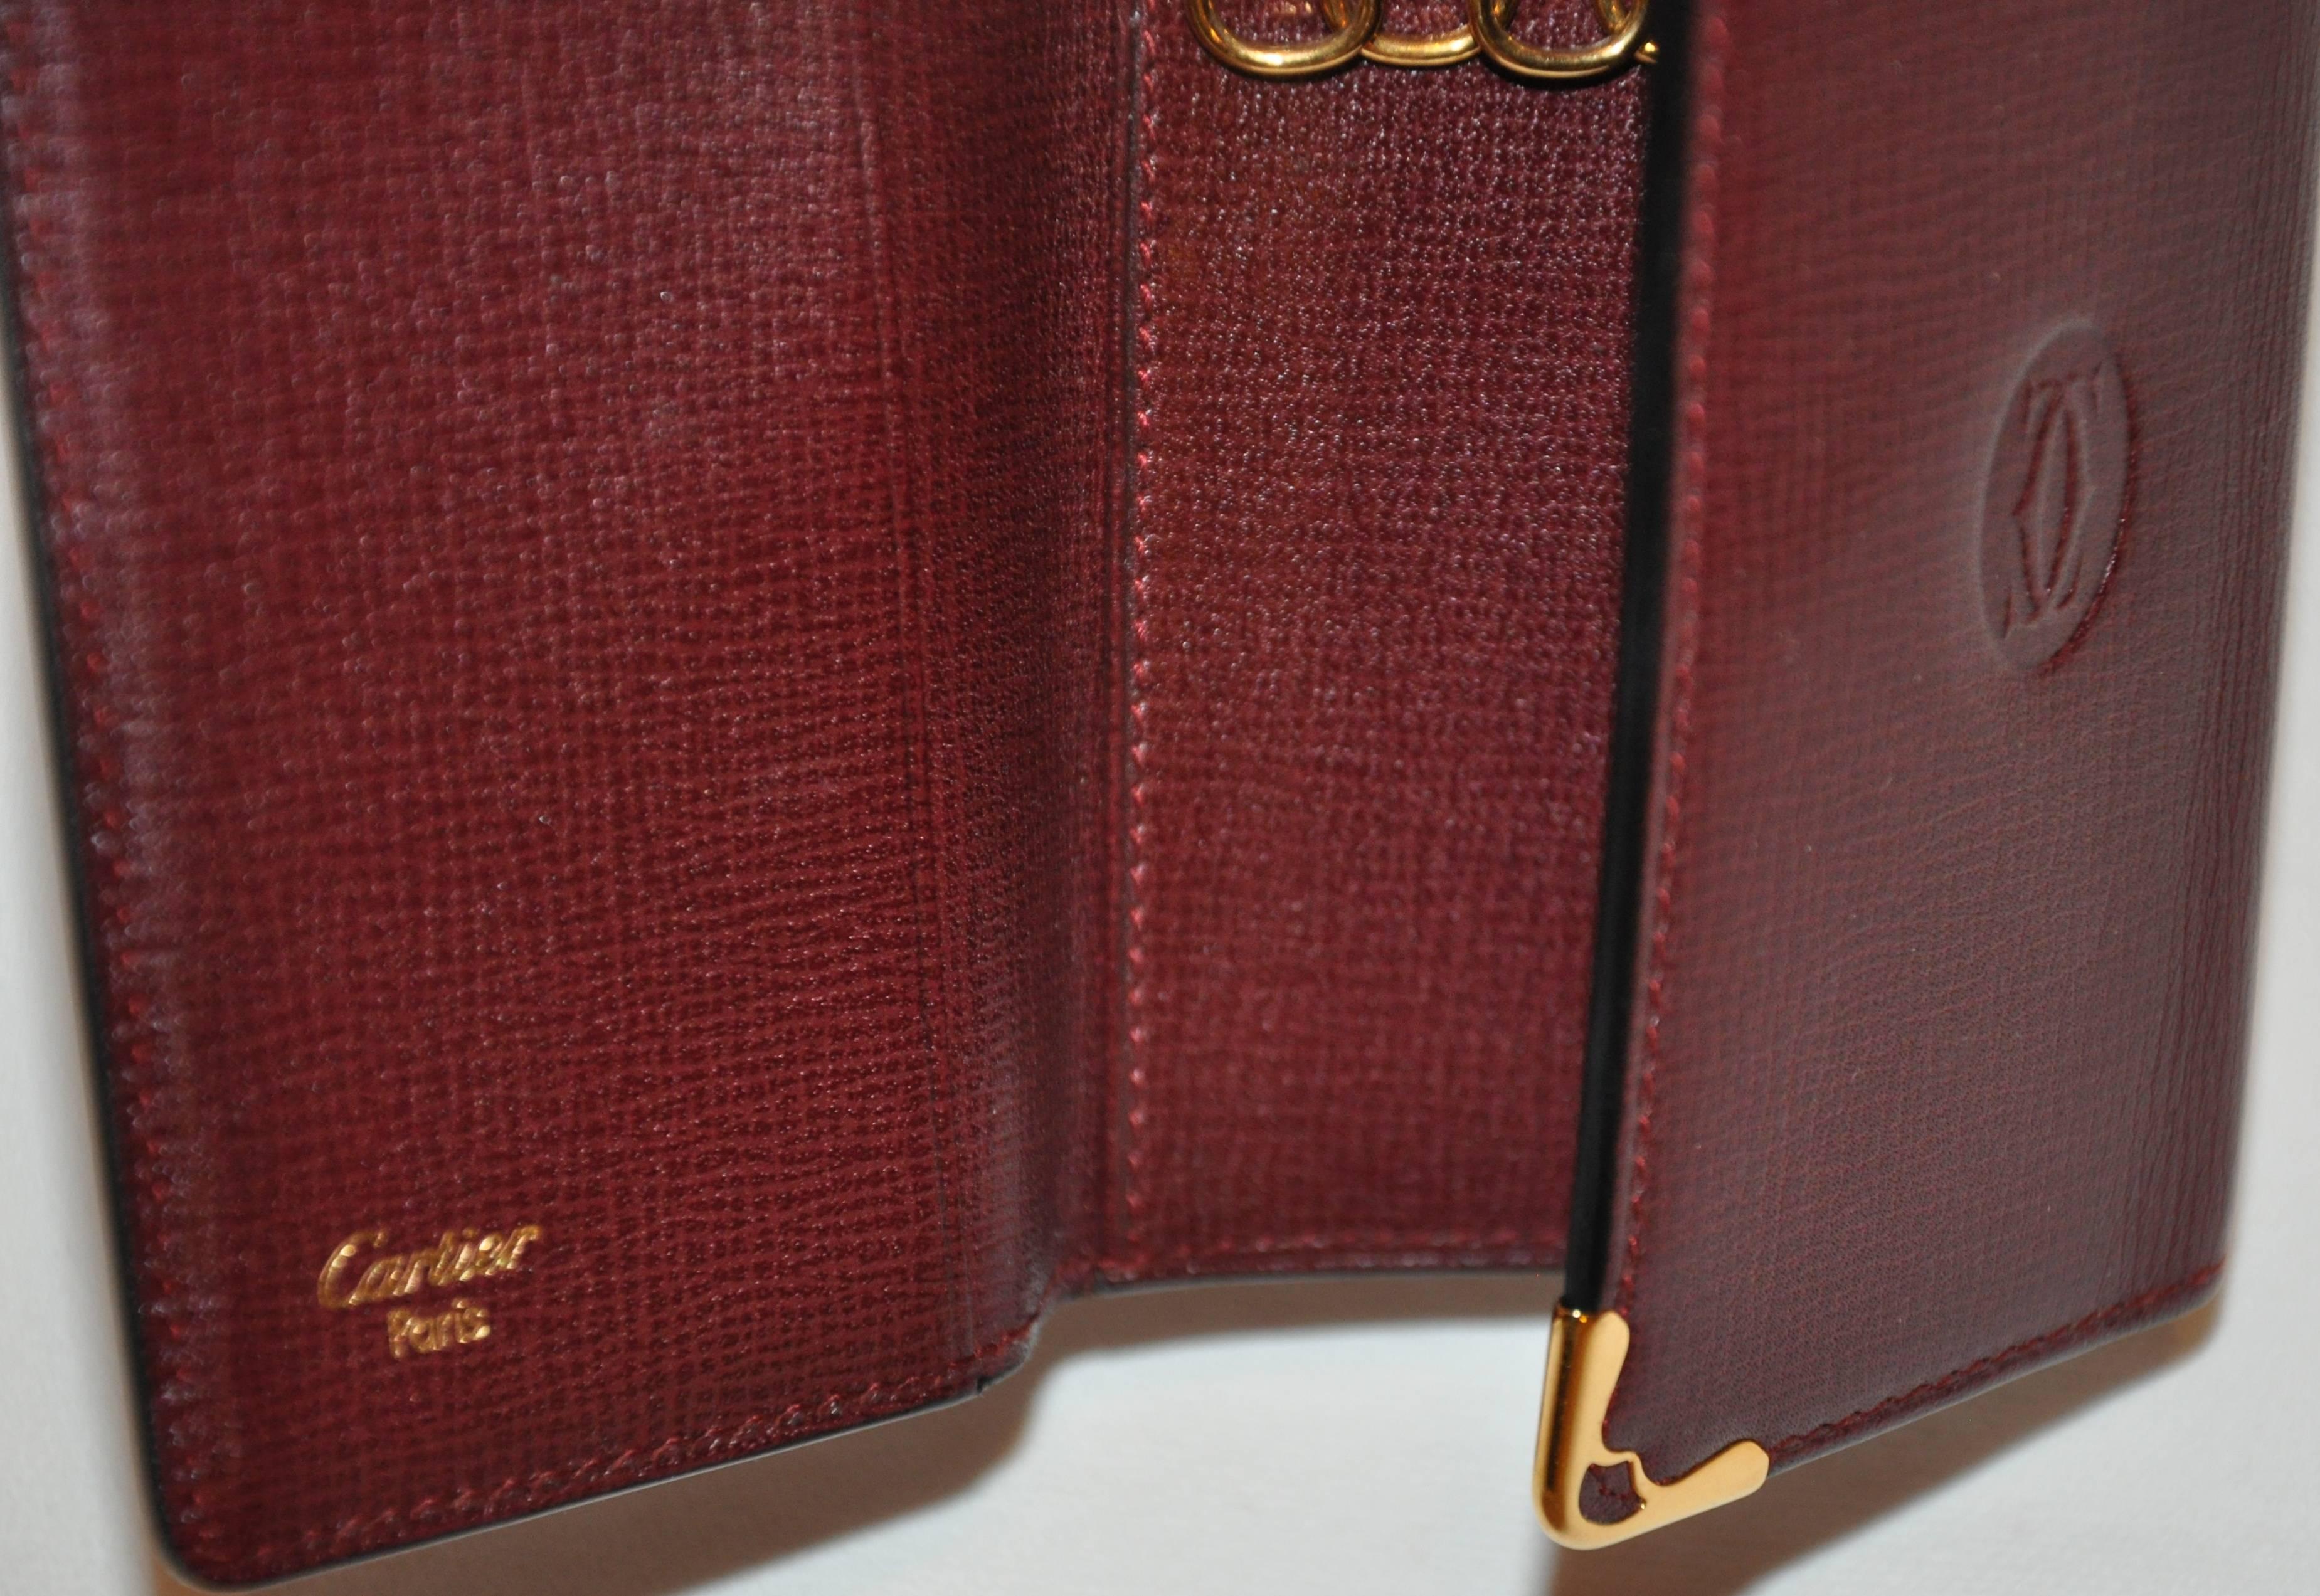        Cartier signature burgundy, textured calfskin key holder is accented with gold-tone hardware along the corners. Cartier's signature logo is elegantly embossed on the center. When closed, the measurements are 2 inches by 4 inches, opened is 7